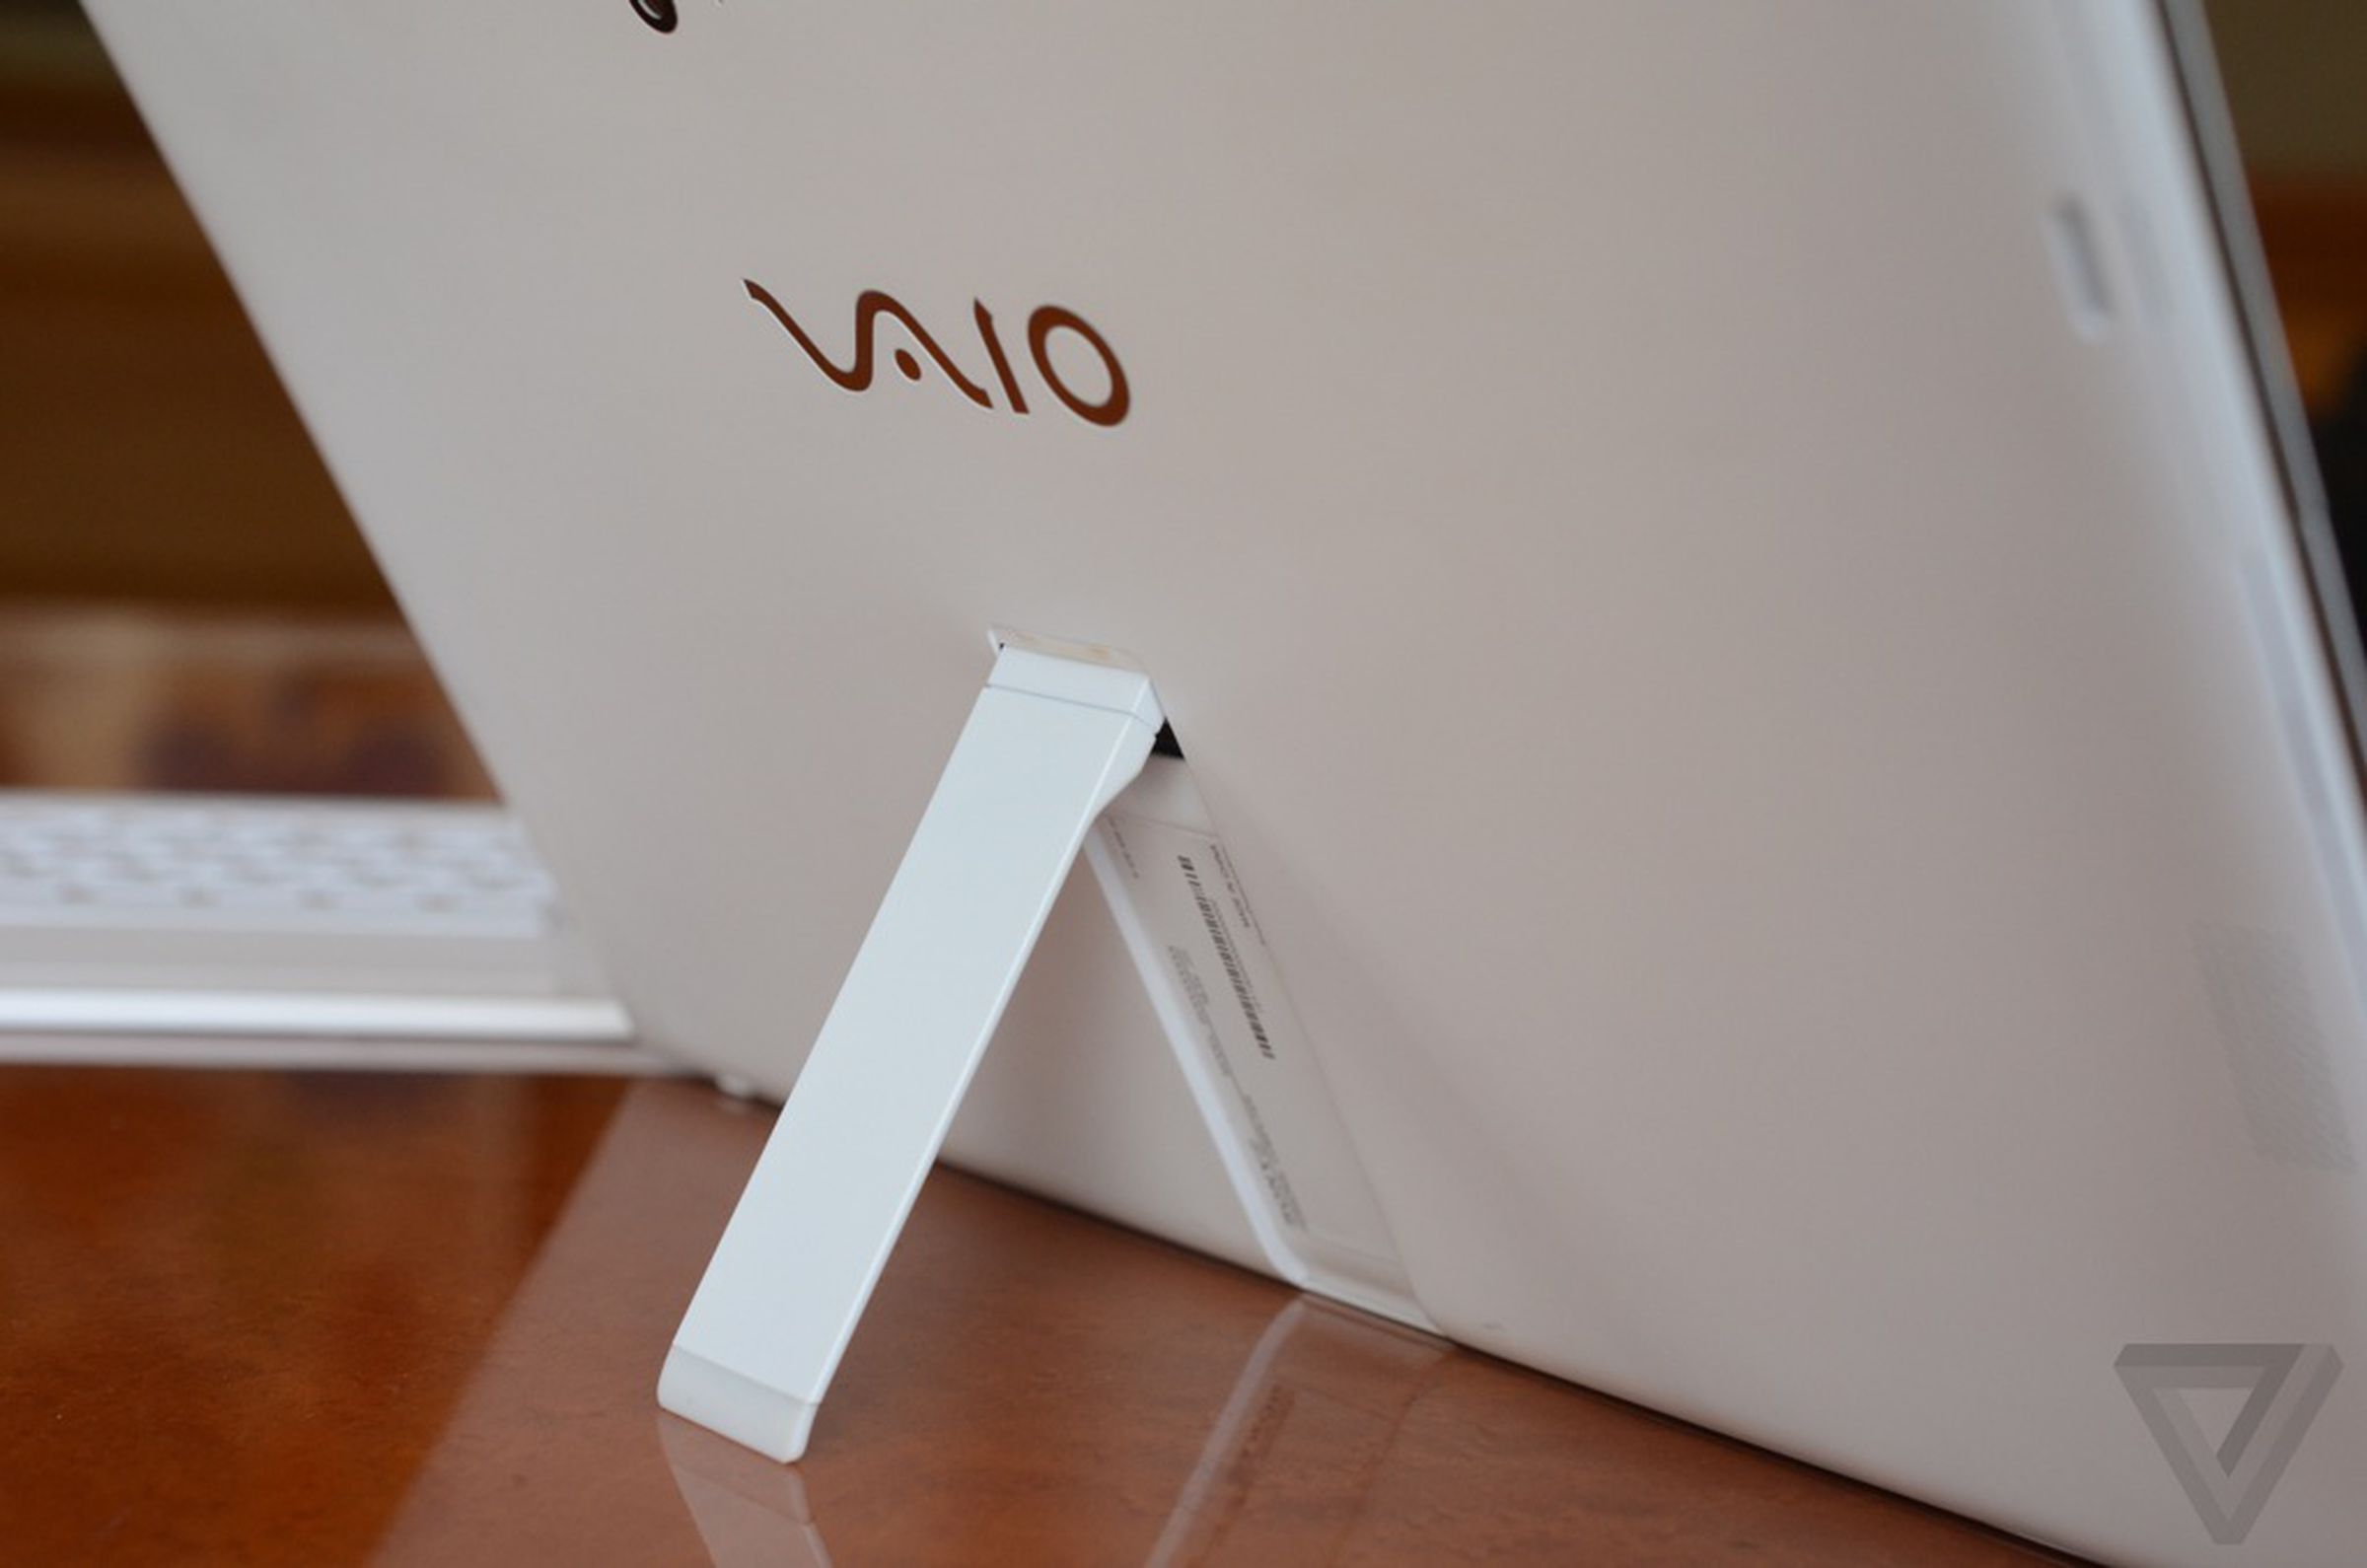 Sony VAIO Flip, Tap 11, and Tap 21 pictures